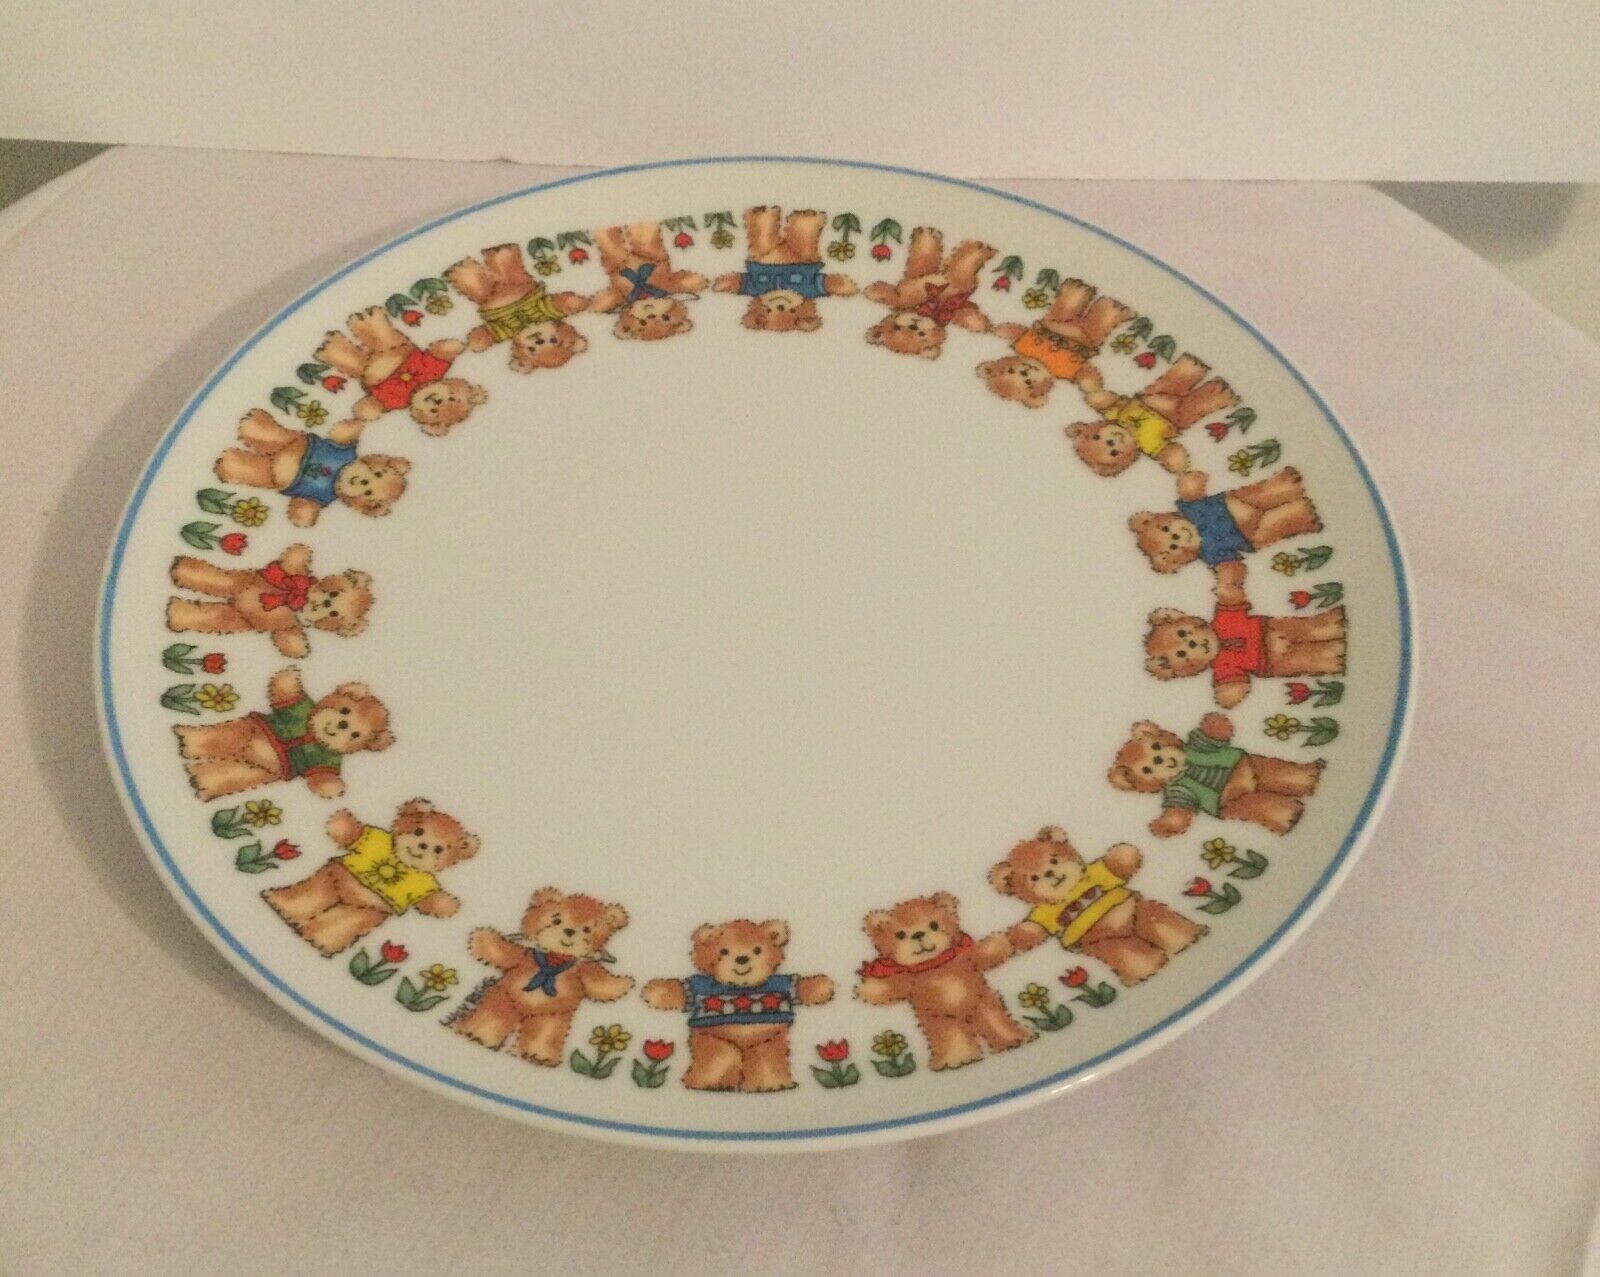 1979 Teddy Bear Plate 7” Vintage Enesco Lucy & Me Rigglets  